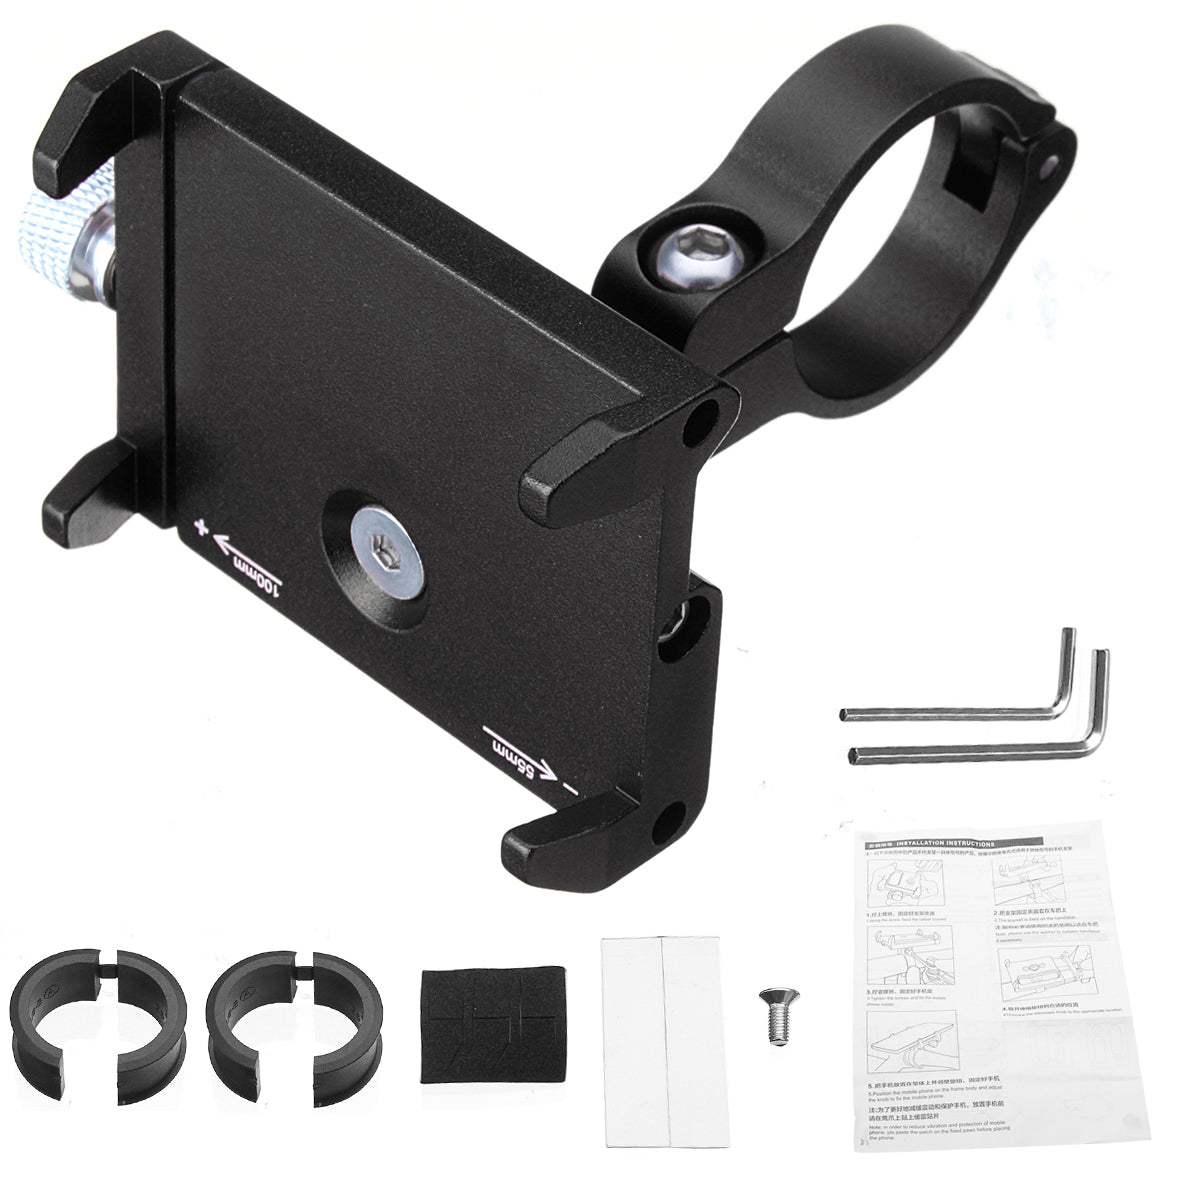 BIKIGHT 55mm-100mm Bicycle Bike Motorcycle Handle Phone Mount Holder For Cell Phone GPS